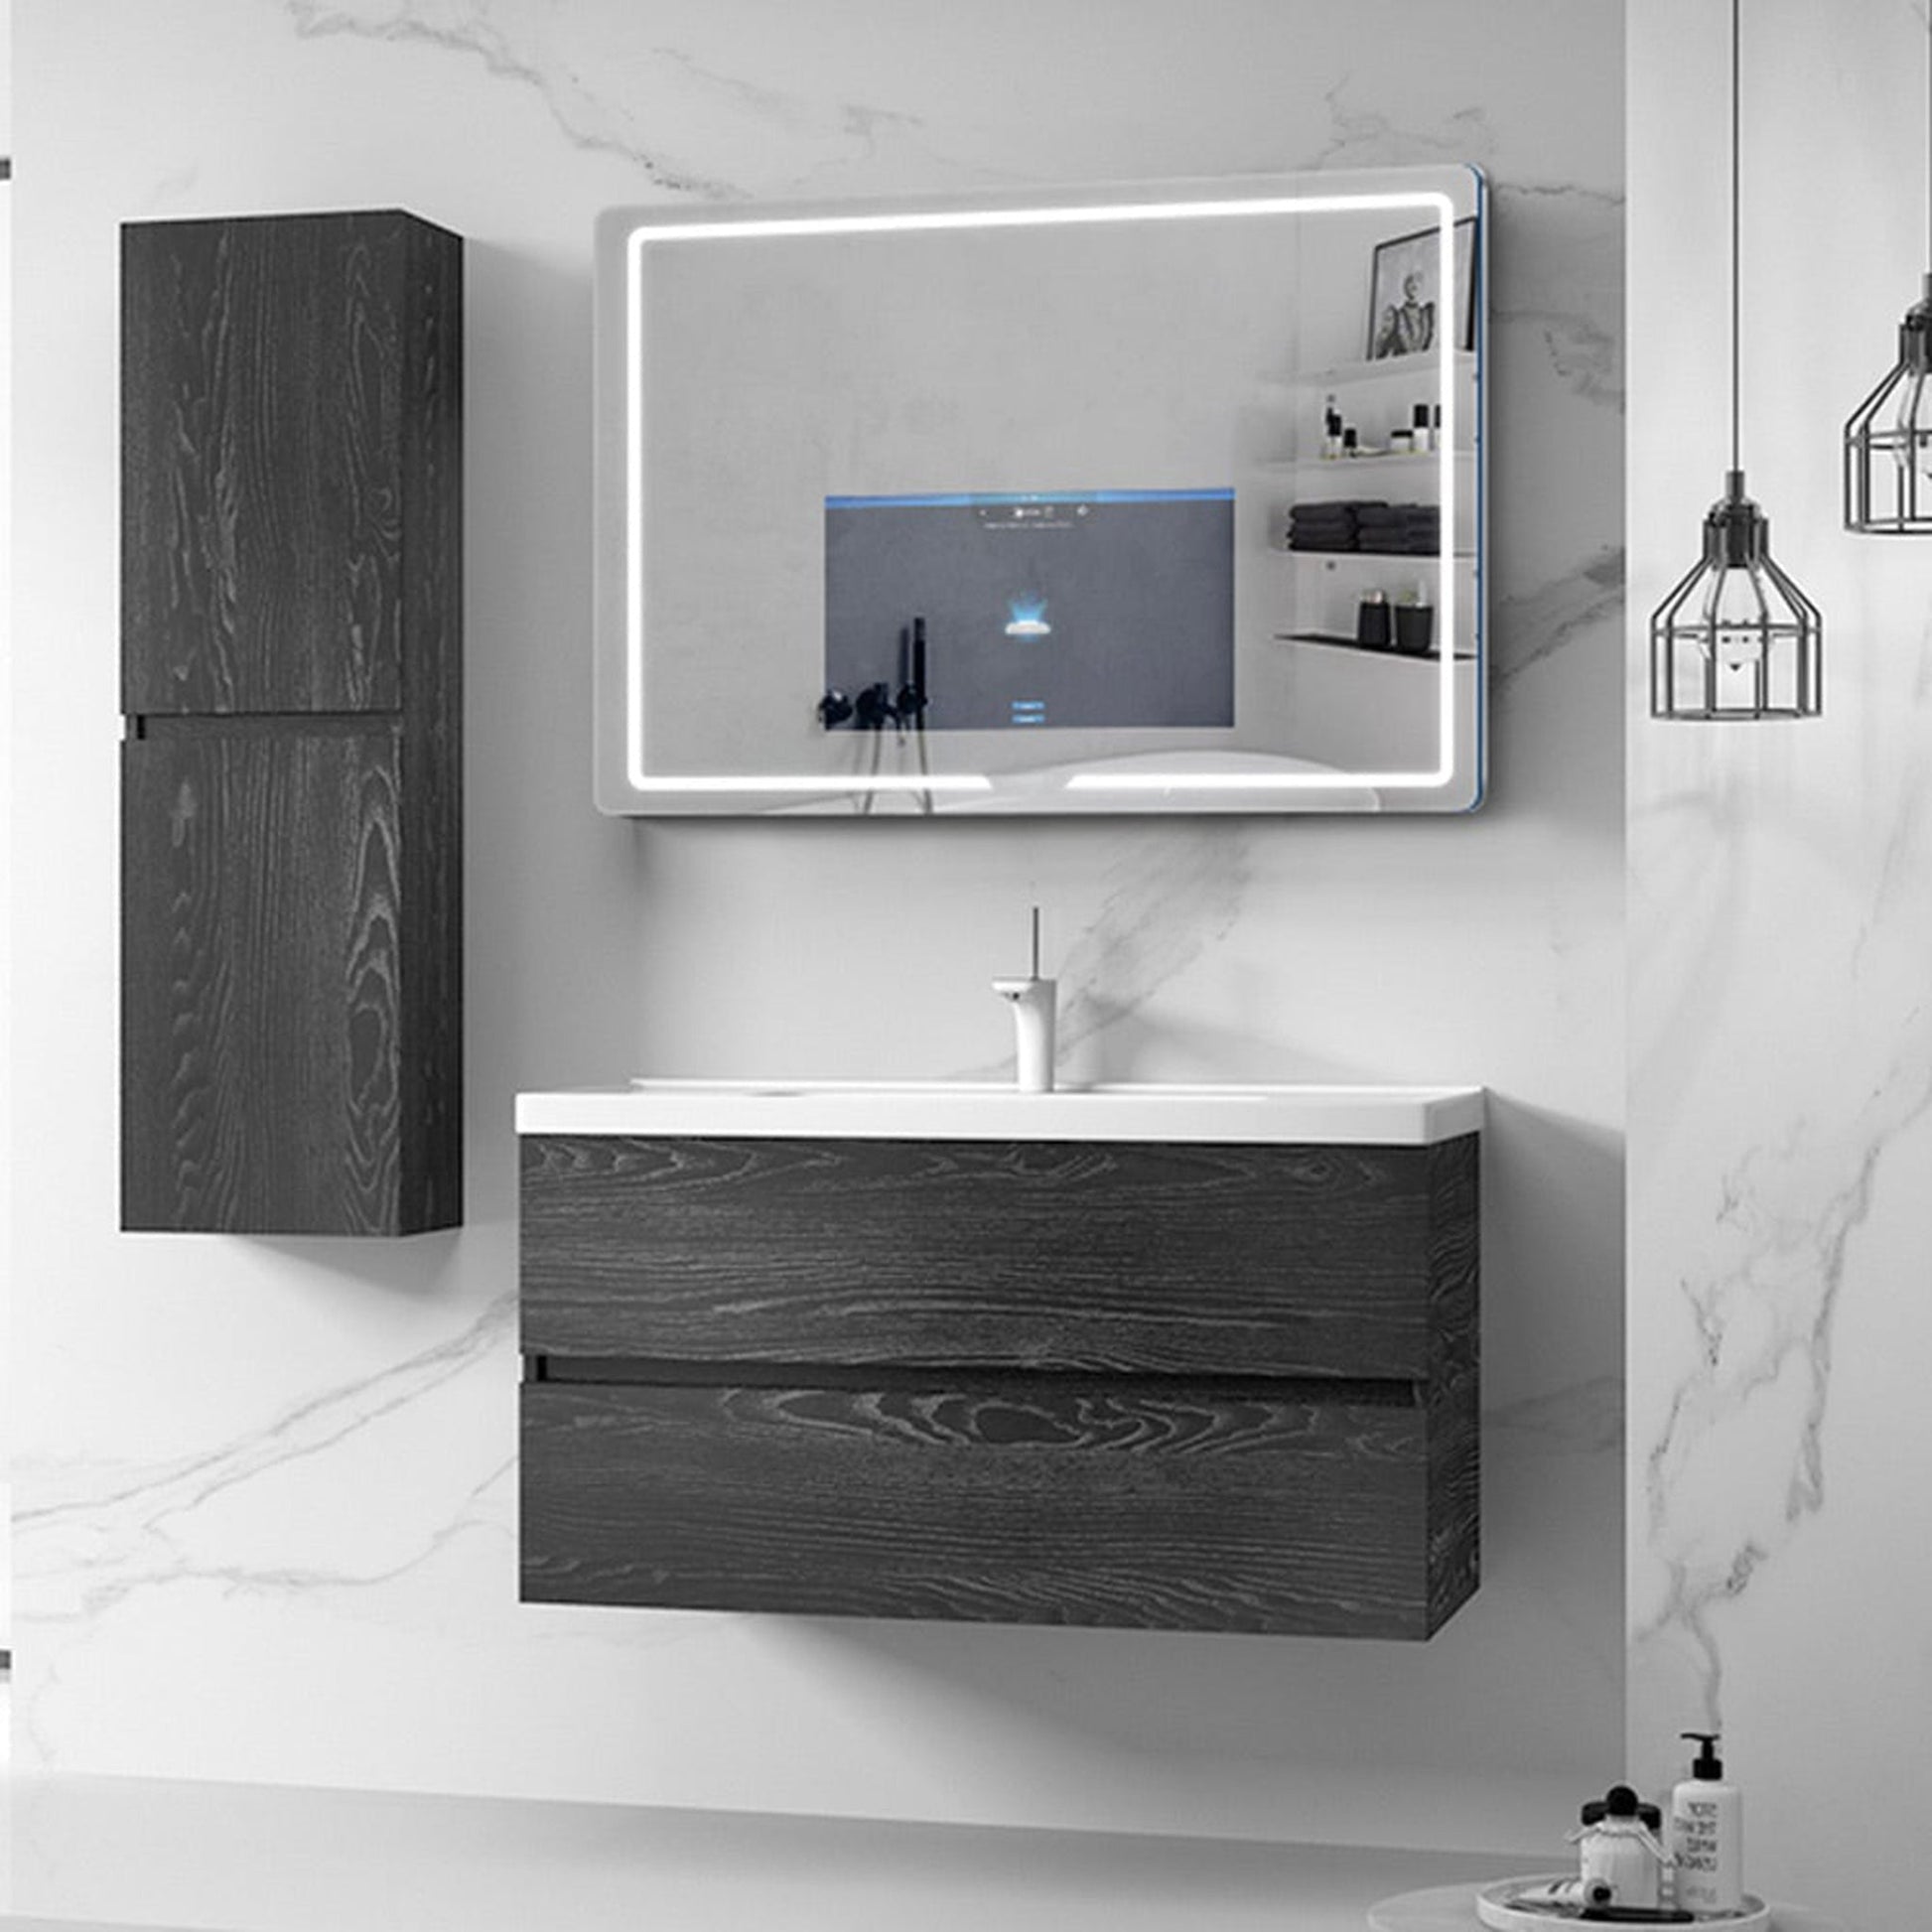 Aquadom NRG-1848-HD-BFS Fitness 18 x 48 inch Energy Smart Mirror with 5MP HD Camera and Body Fat Scale